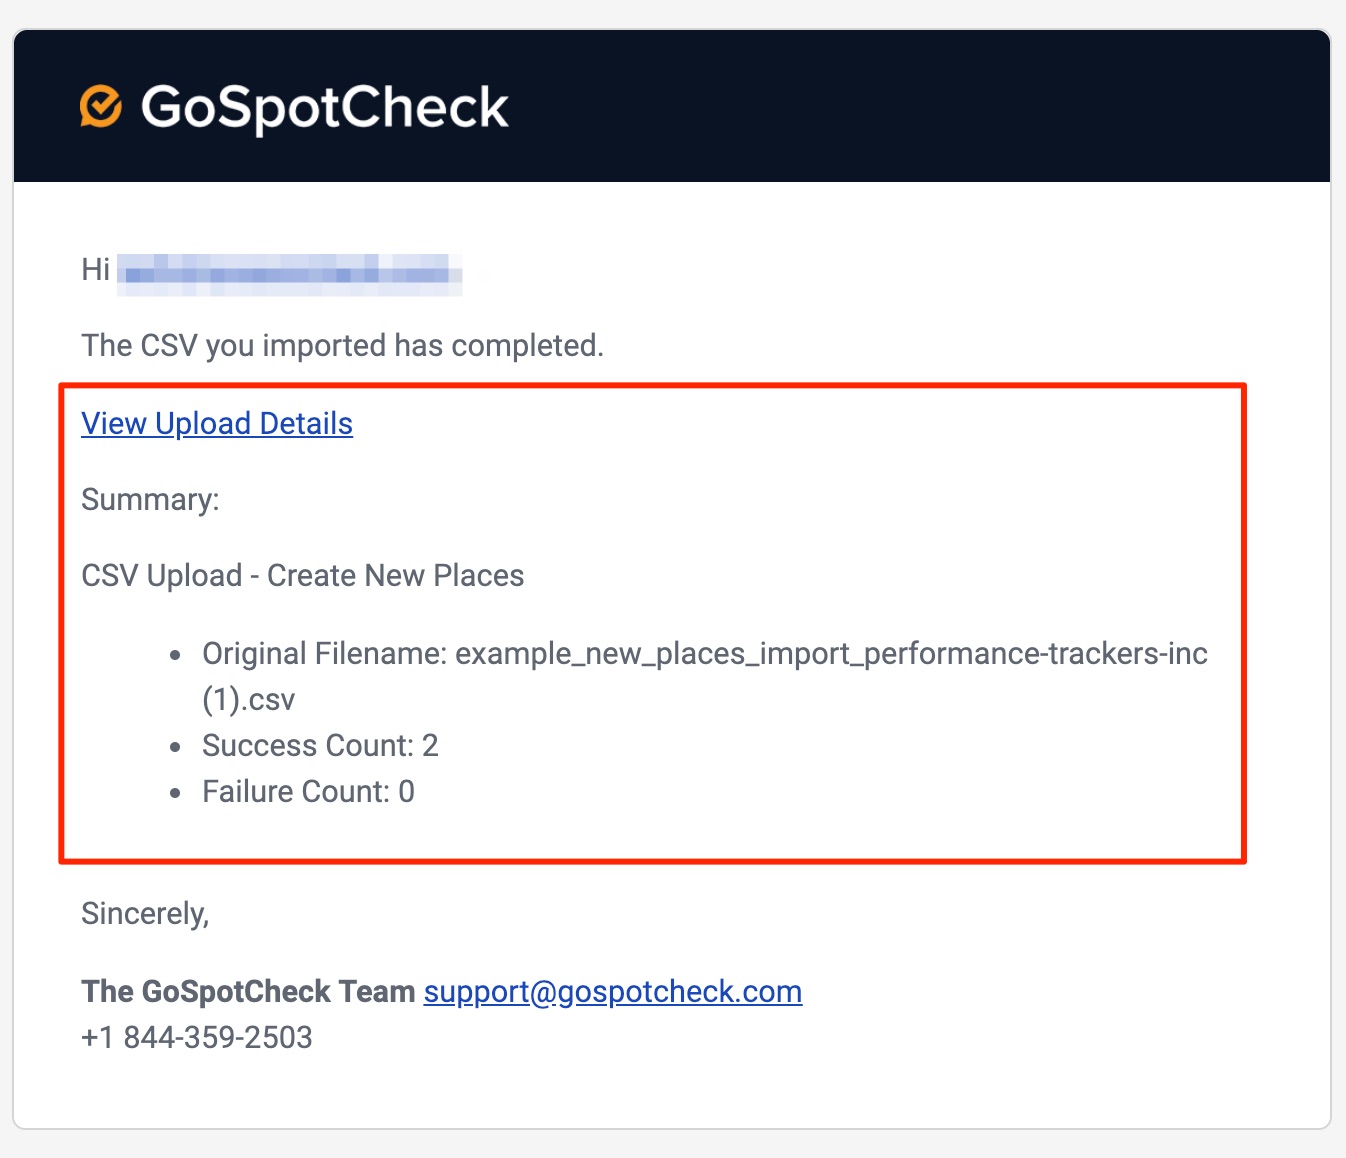 Places_CSV_Upload_Completed_for__example_new_places_import_performance-trackers-inc__1__csv__-_beth_gospotcheck_com_-_GoSpotCheck_Mail.jpg